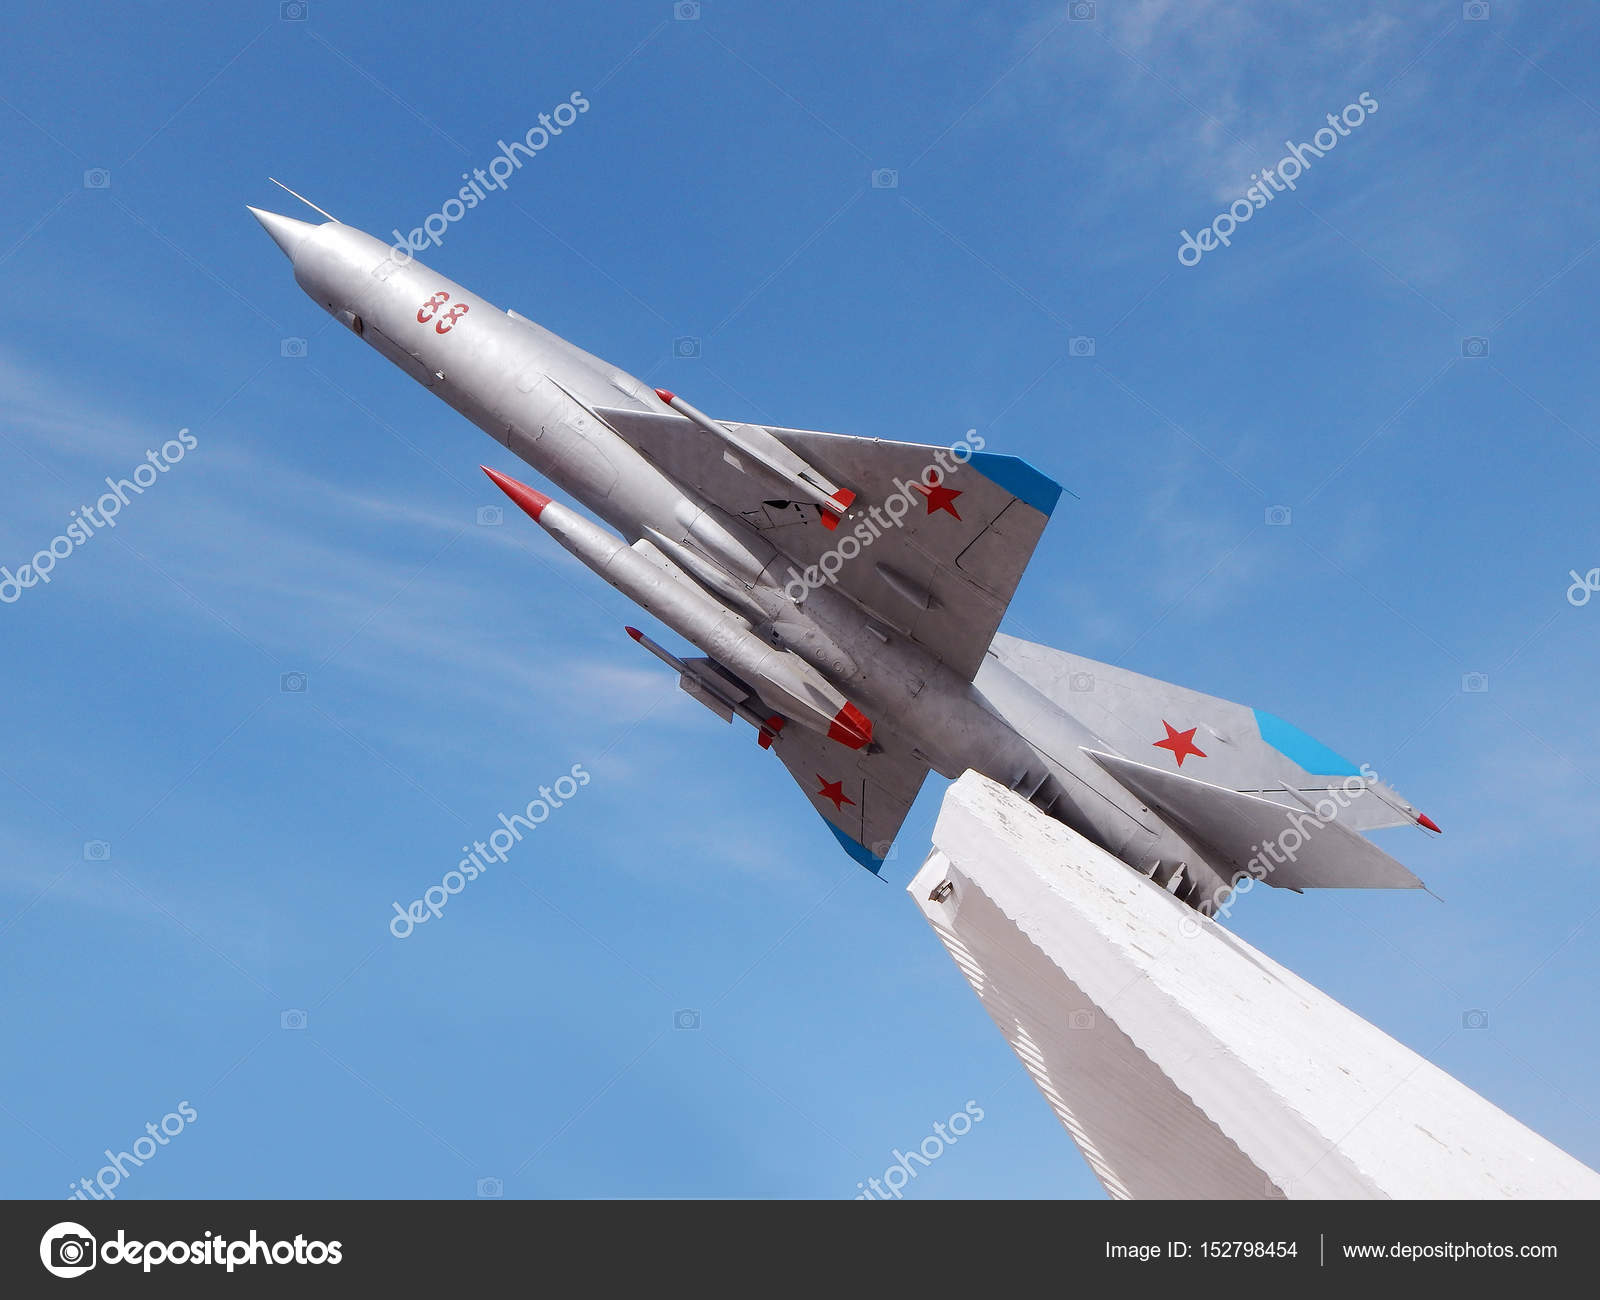 Monument to the aircraft fighter. — Stock Photo © ekipaj #152798454